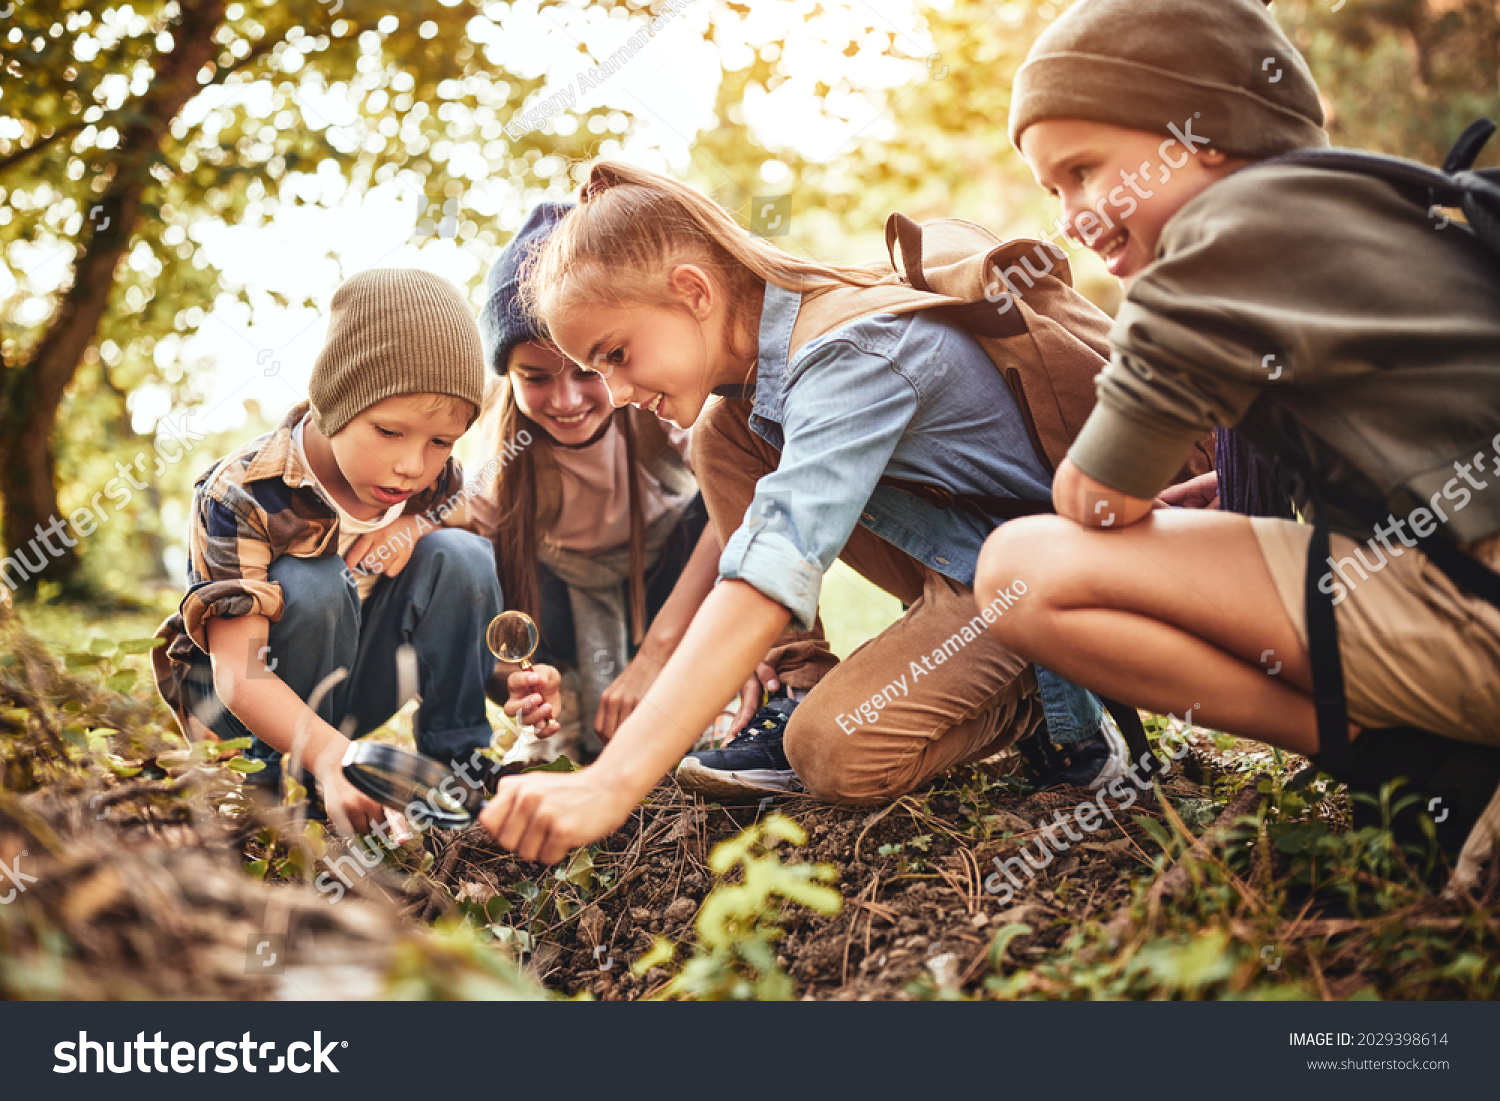 Happy children boys and girls in casual clothes with backpacks making bonfire with magnifying glass together in green forest during school camping activity on sunny day, smiling kids exploring nature #2029398614